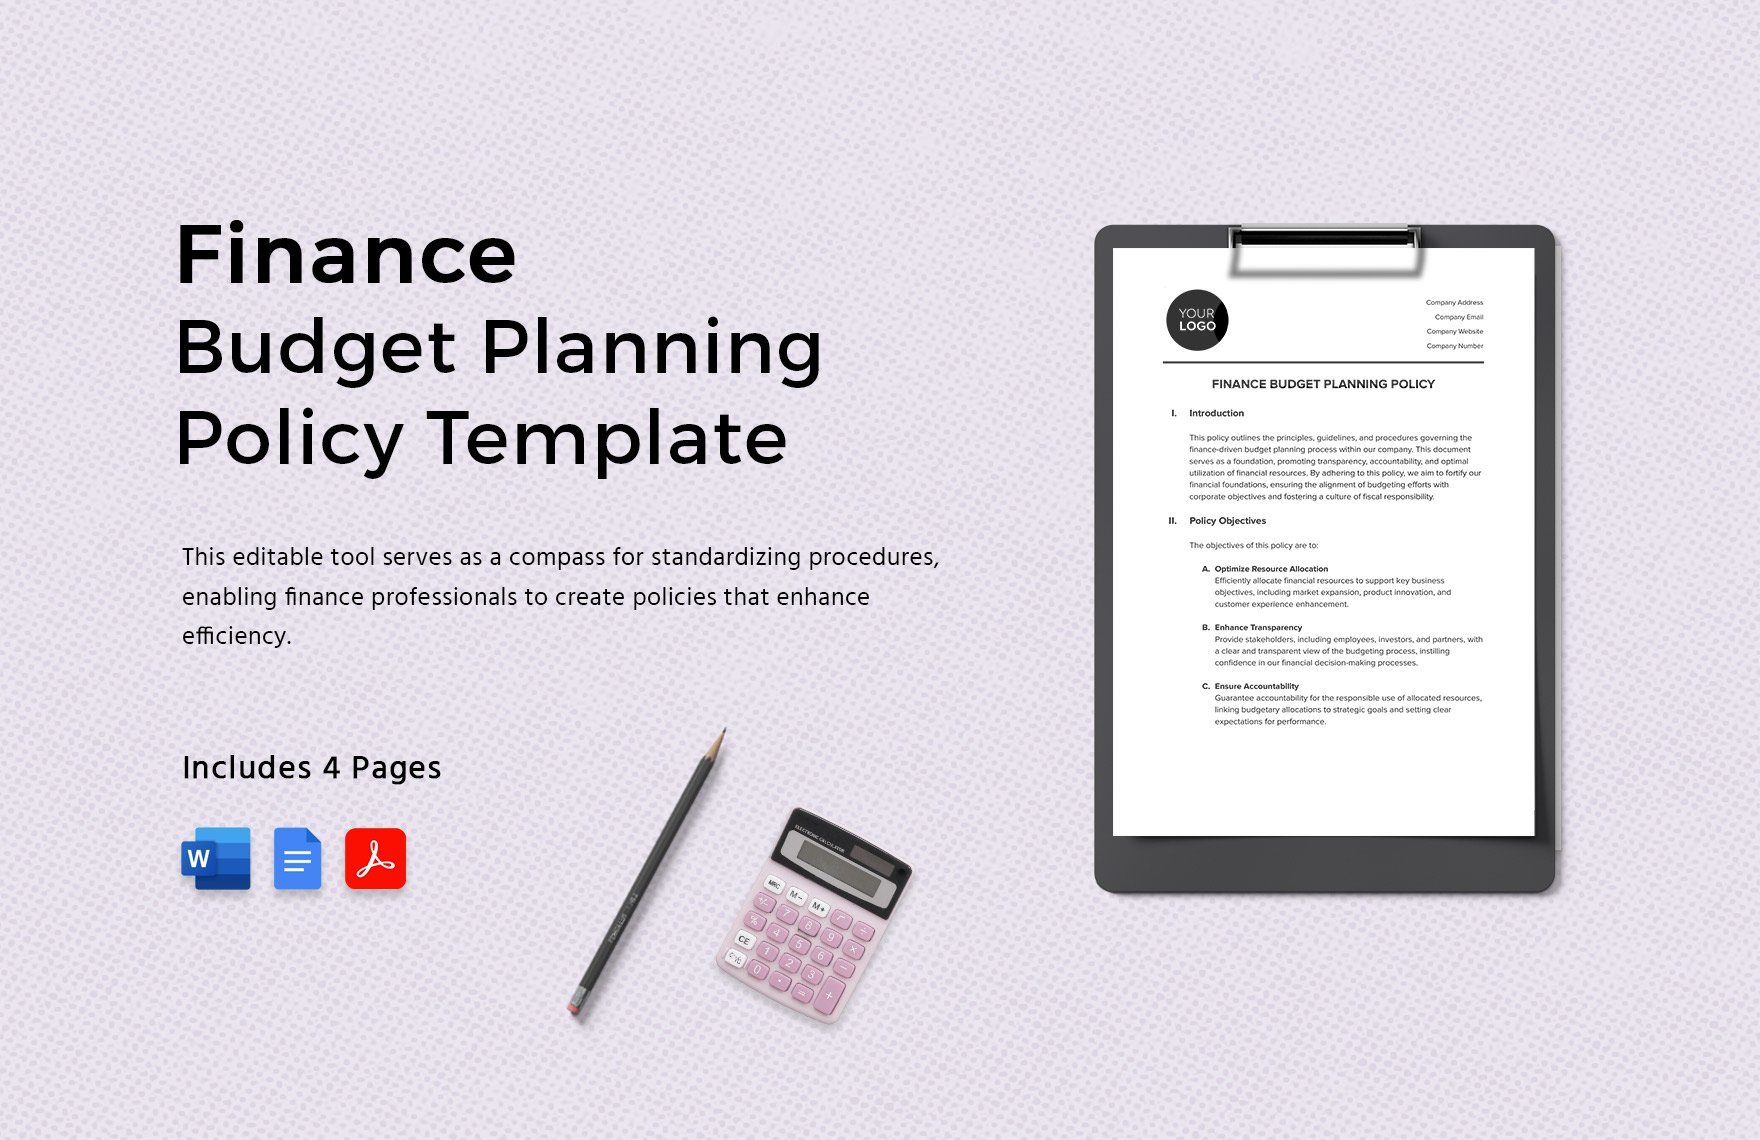 Finance Budget Planning Policy Template